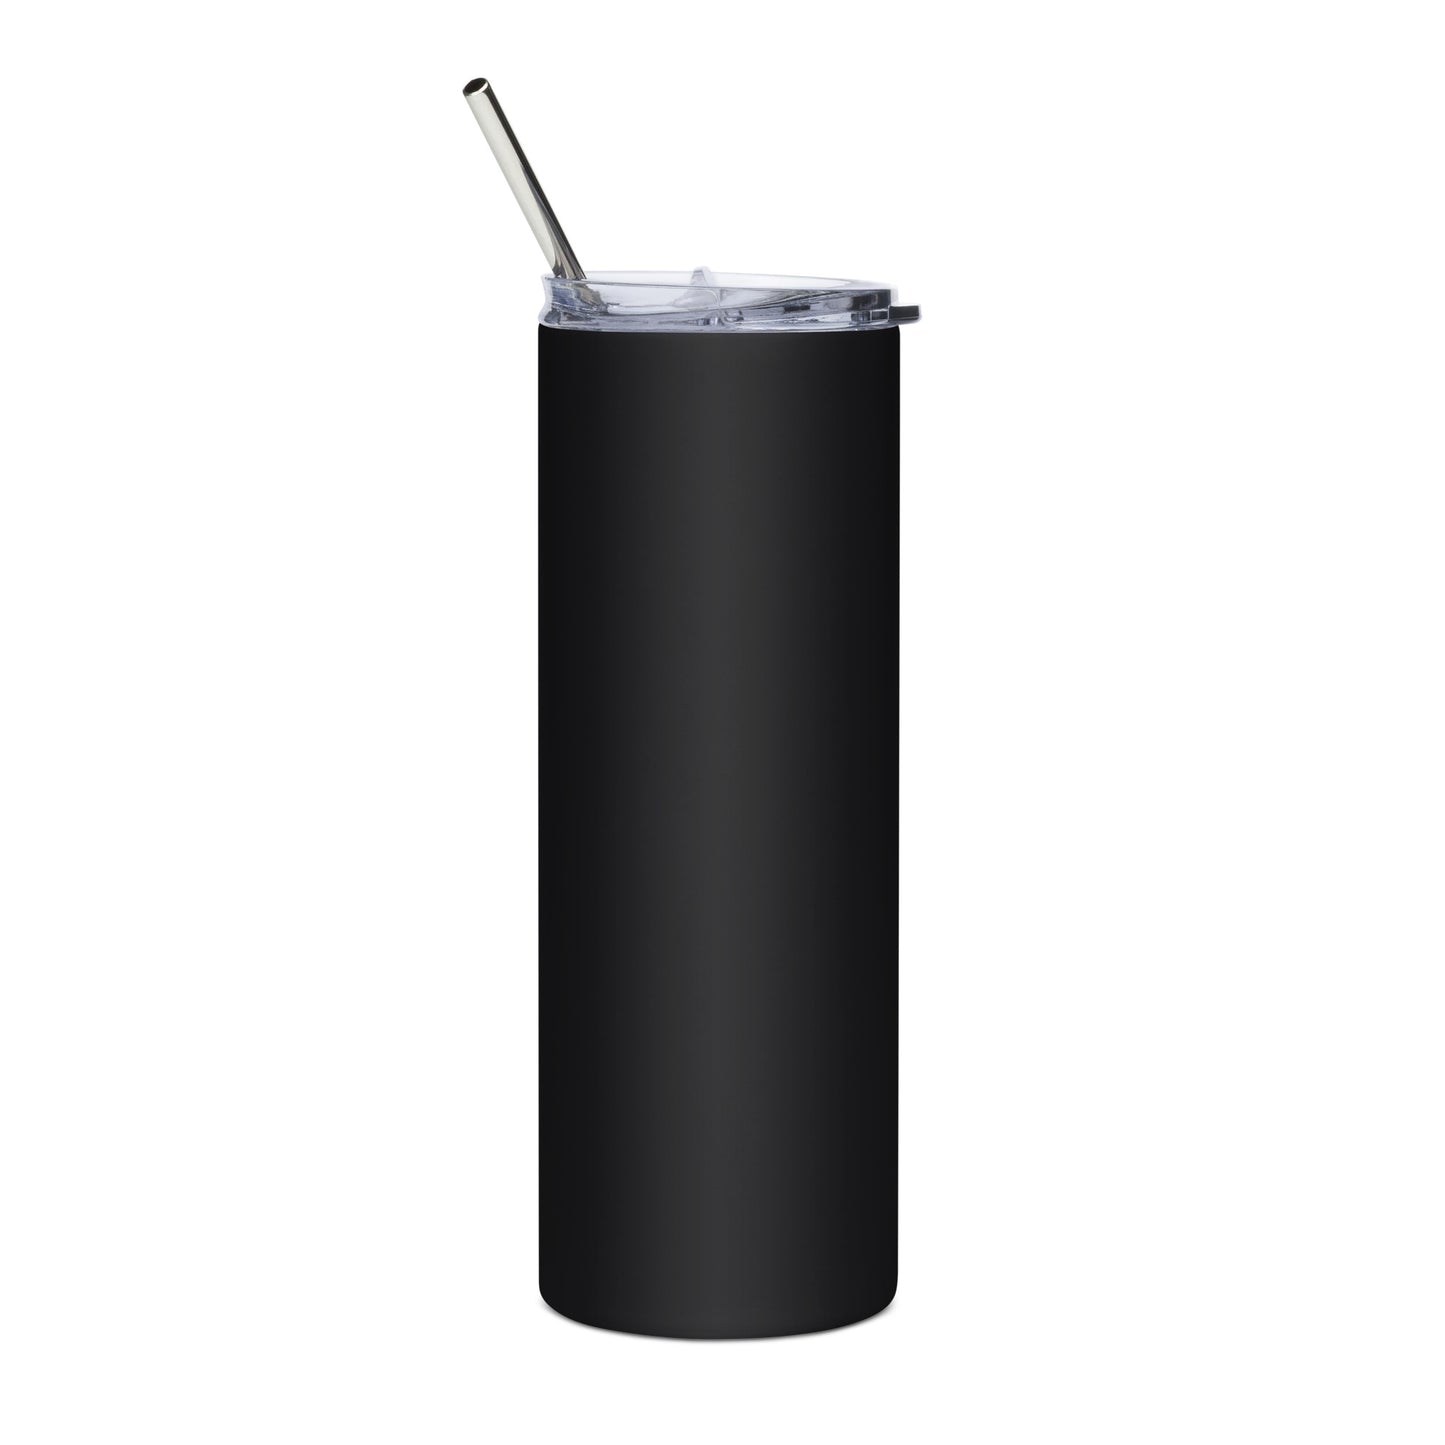 Stainless steel tumbler - System